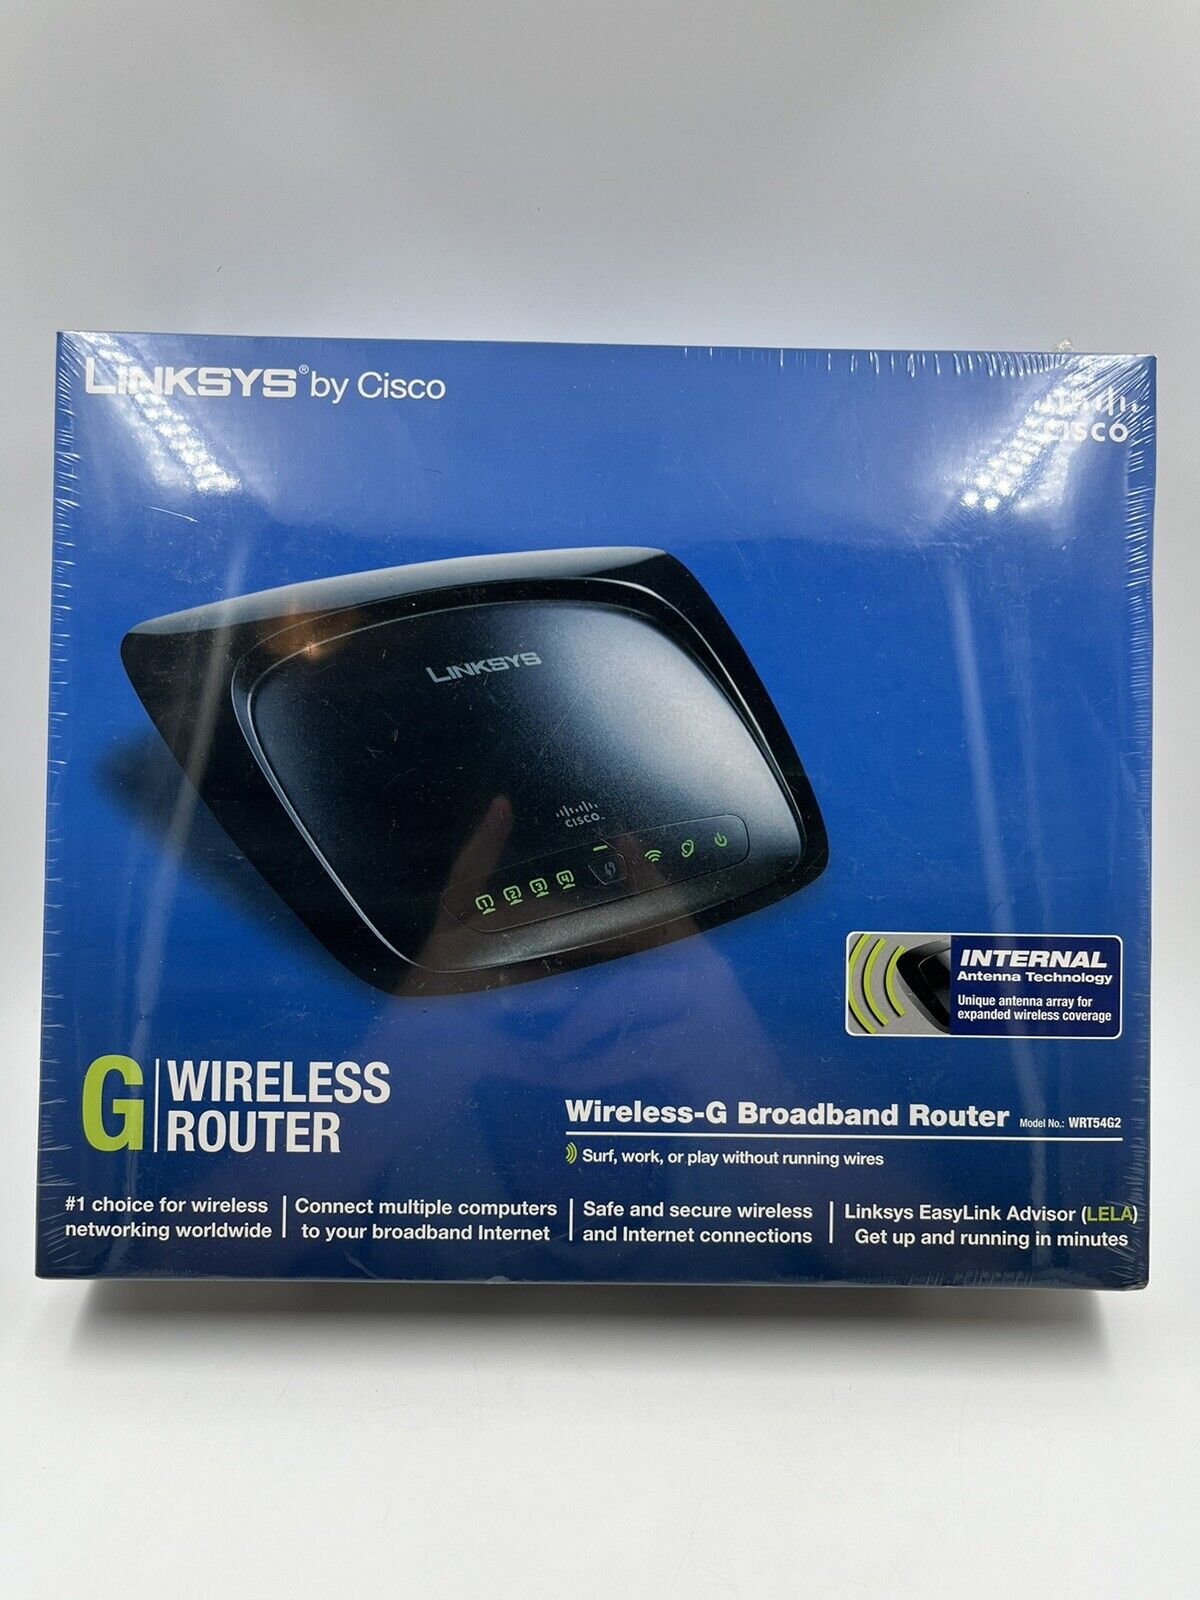 NEW LINKSYS By Cisco WRT54G2 Wireless-G Broadband Router ~ FACTORY SEALED